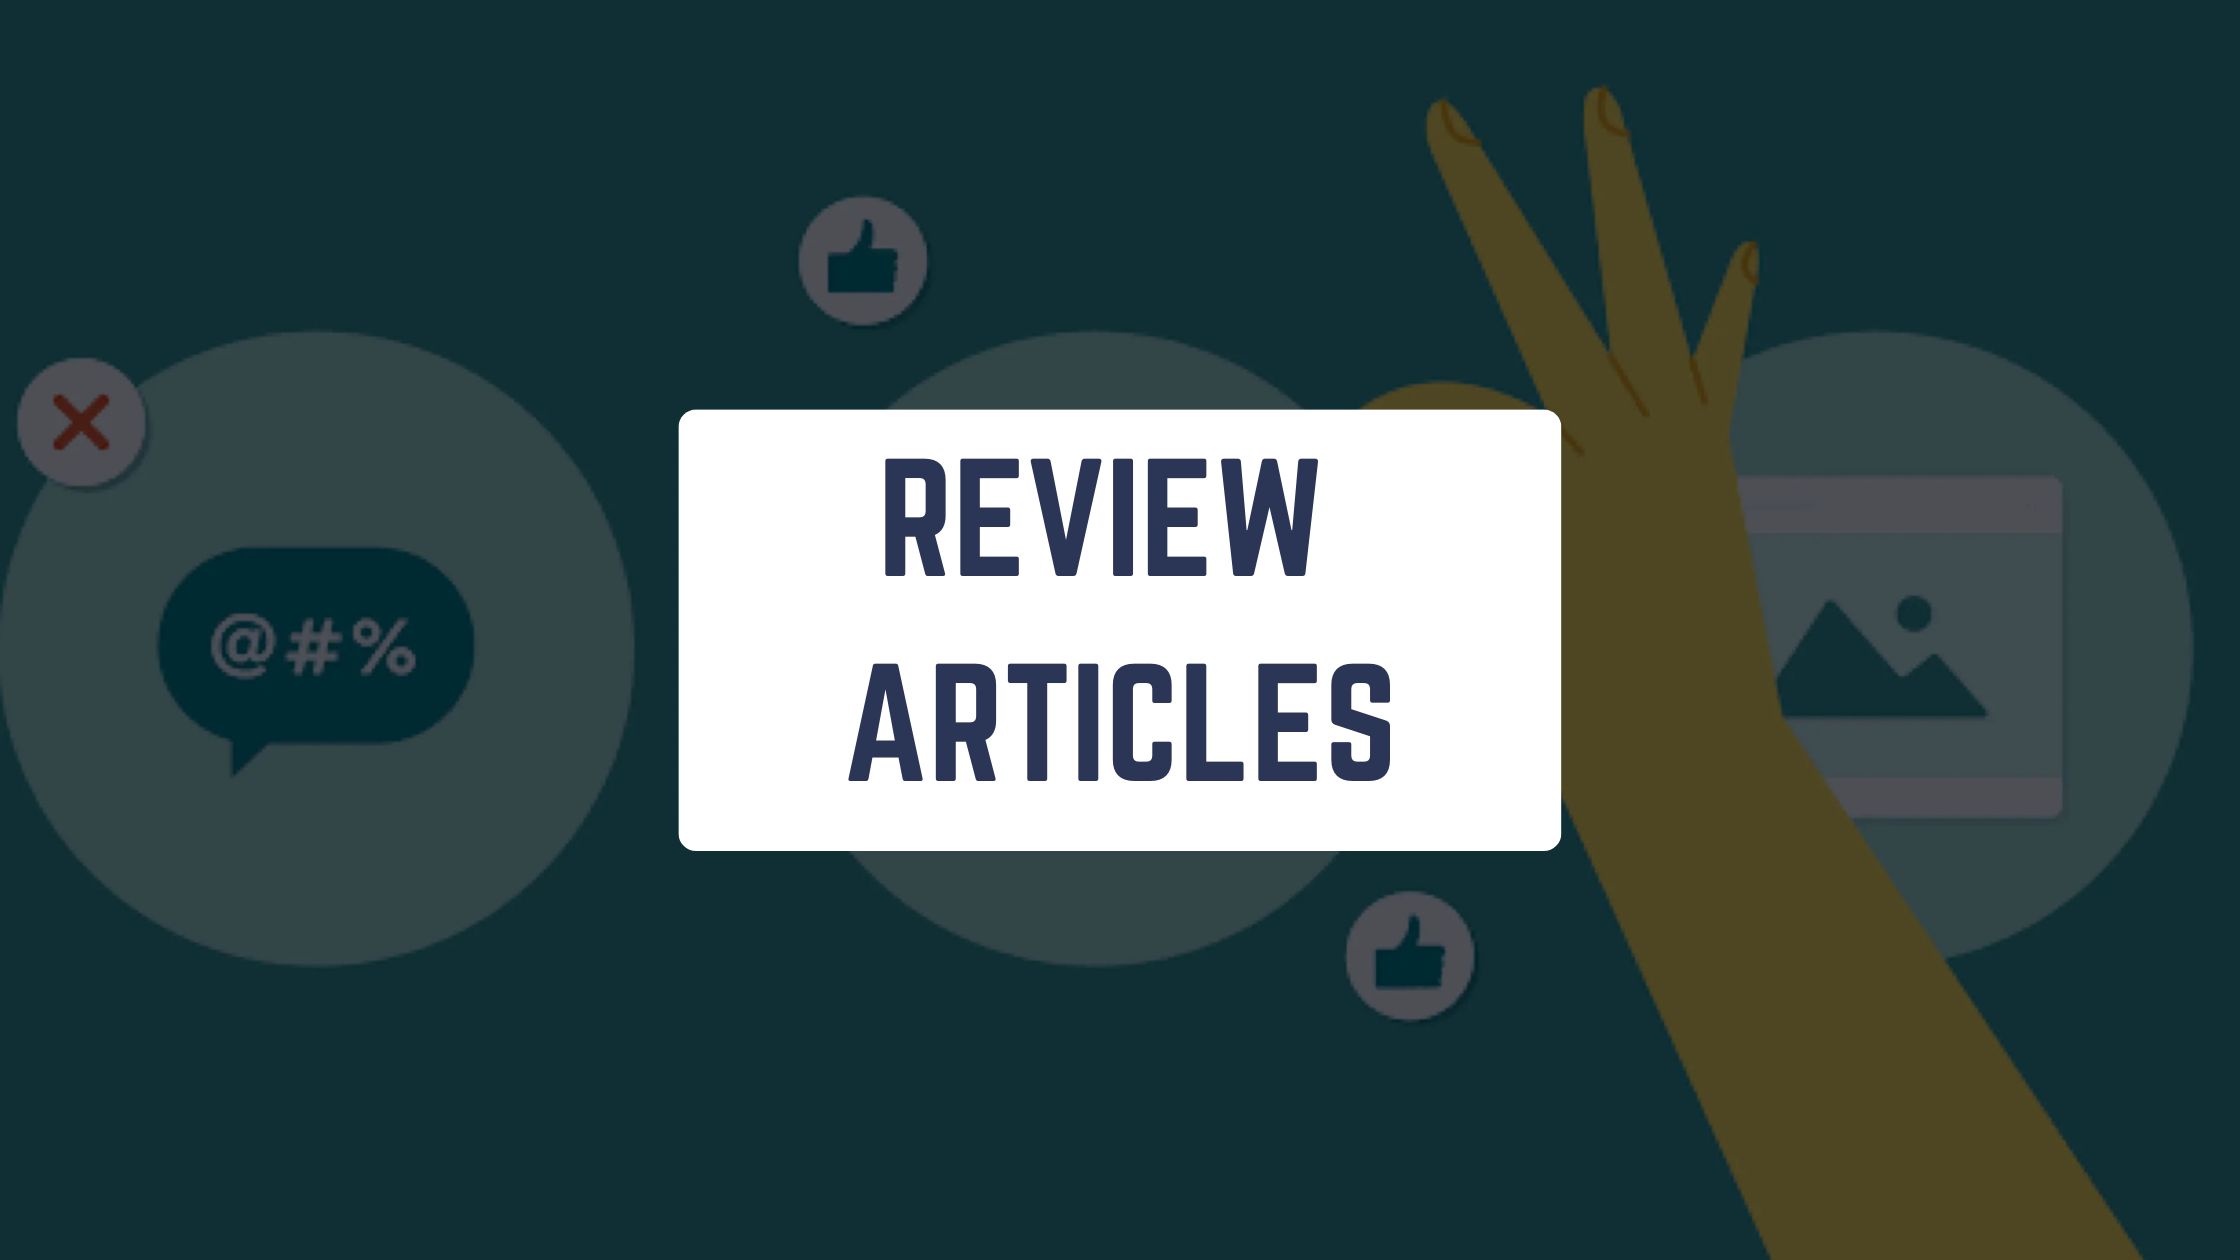 Review Articles